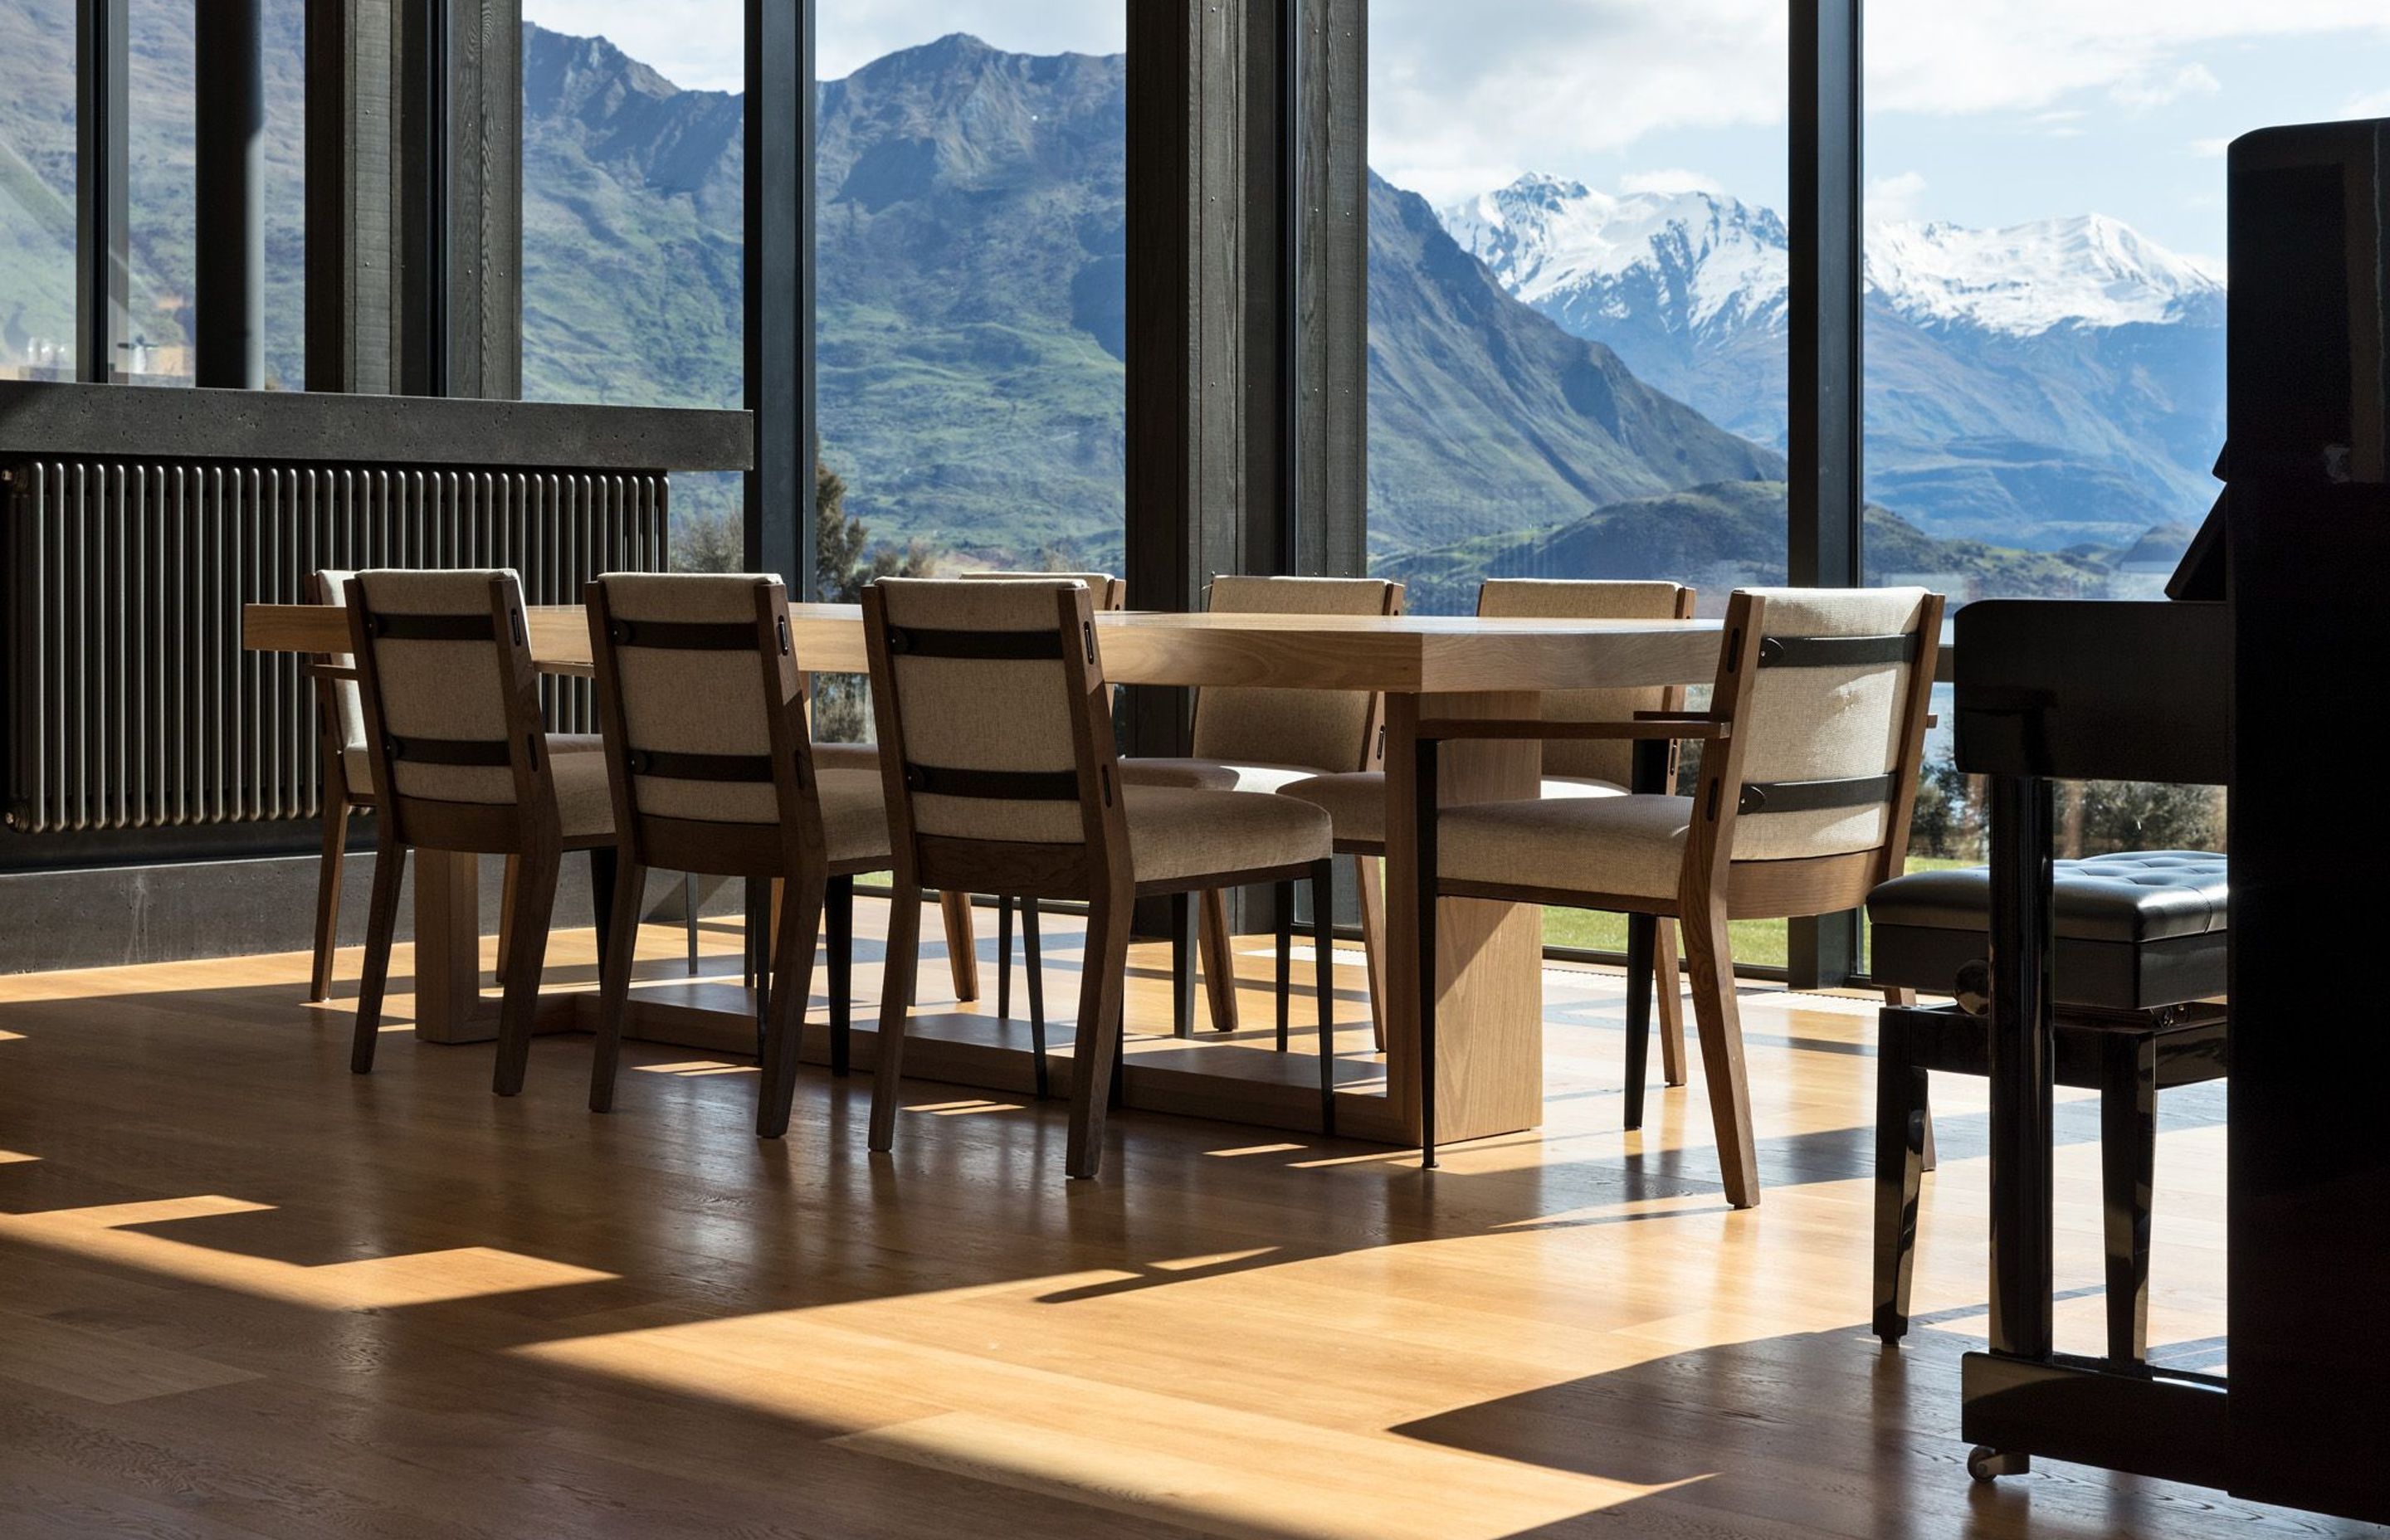 The dining area enjoys spectacular views of the mountains.